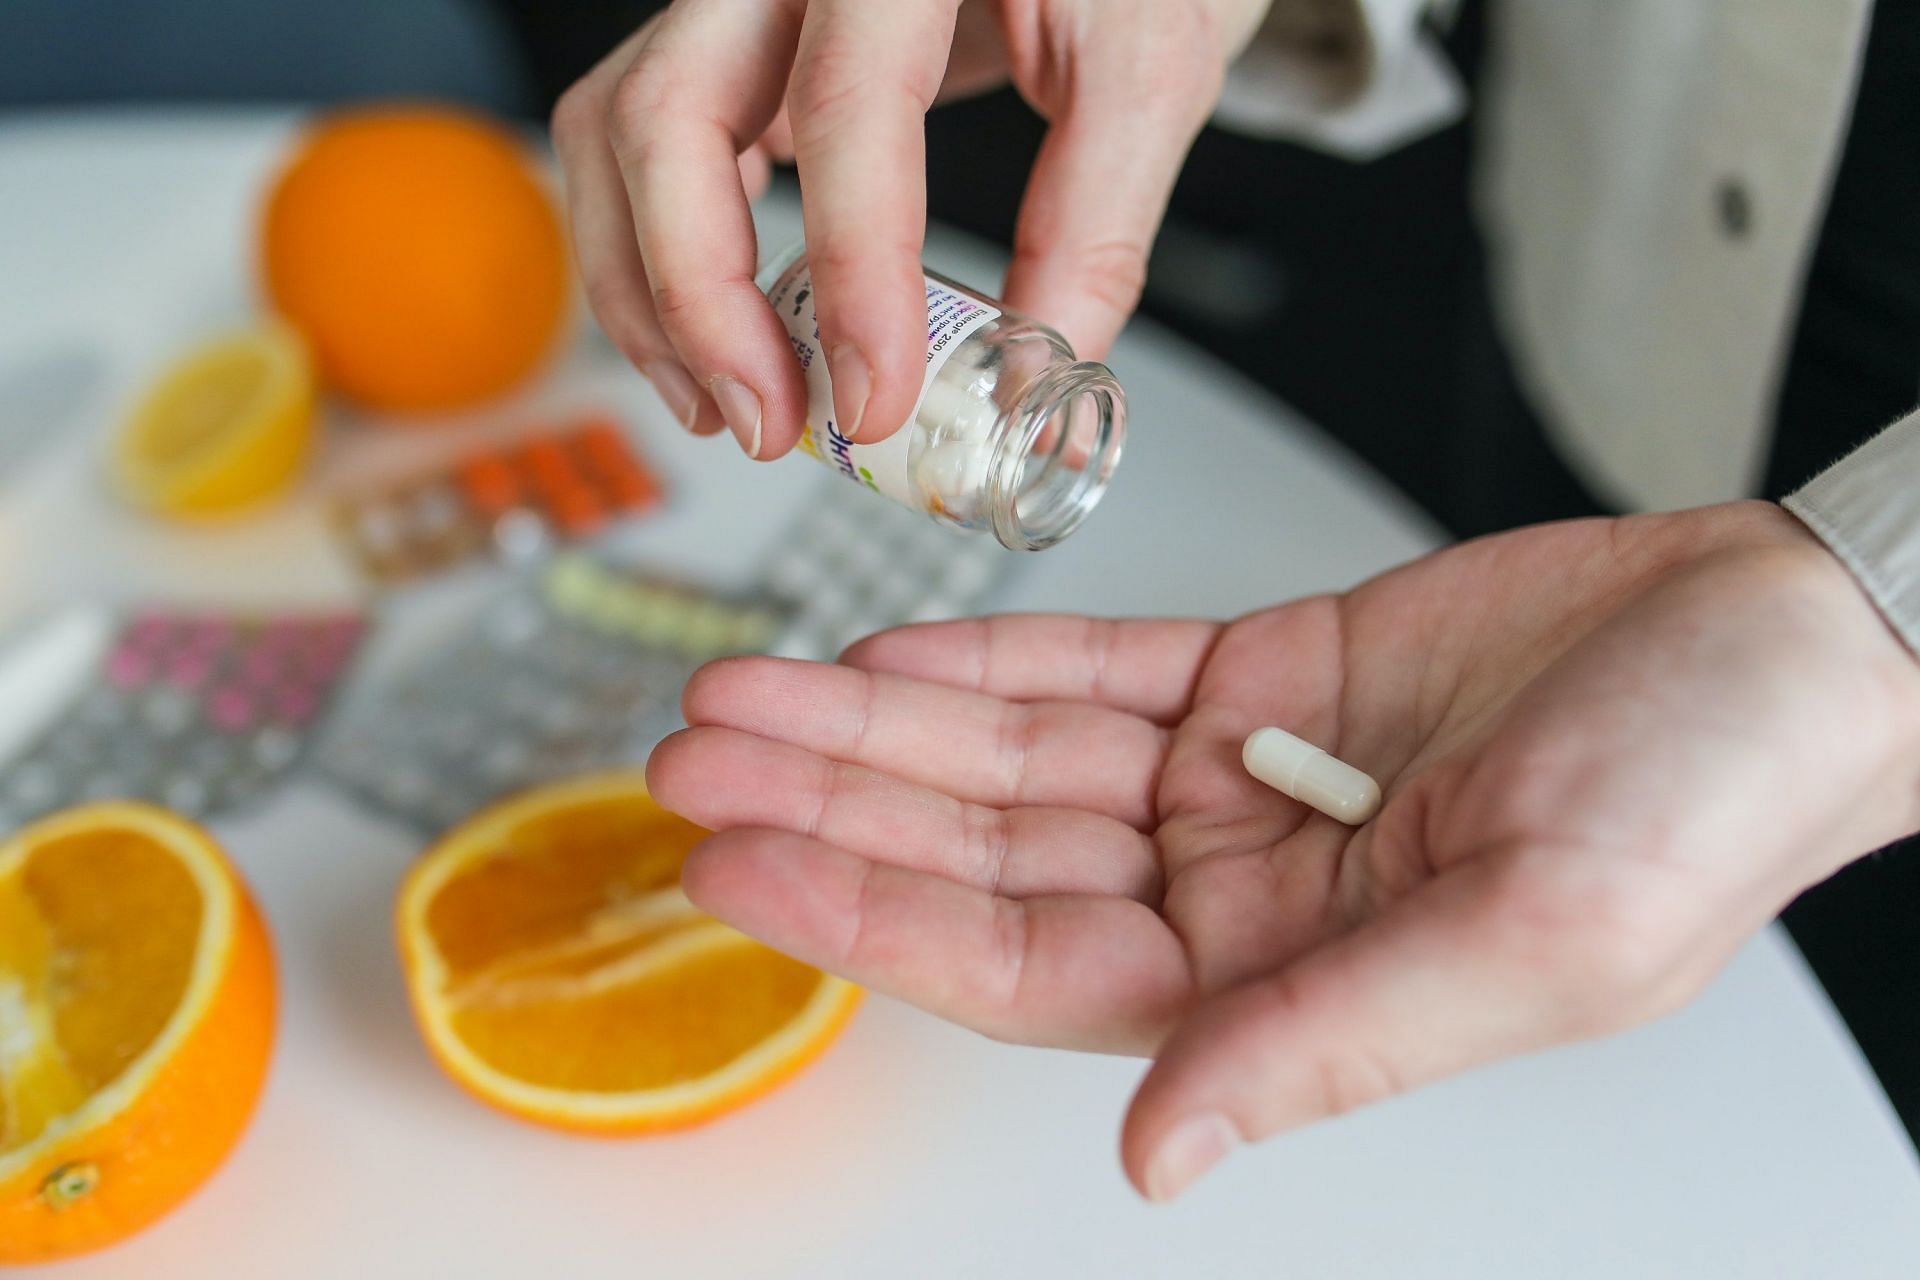 Supplements for weight loss (Image via Pexels/Polina Tankilevitch)